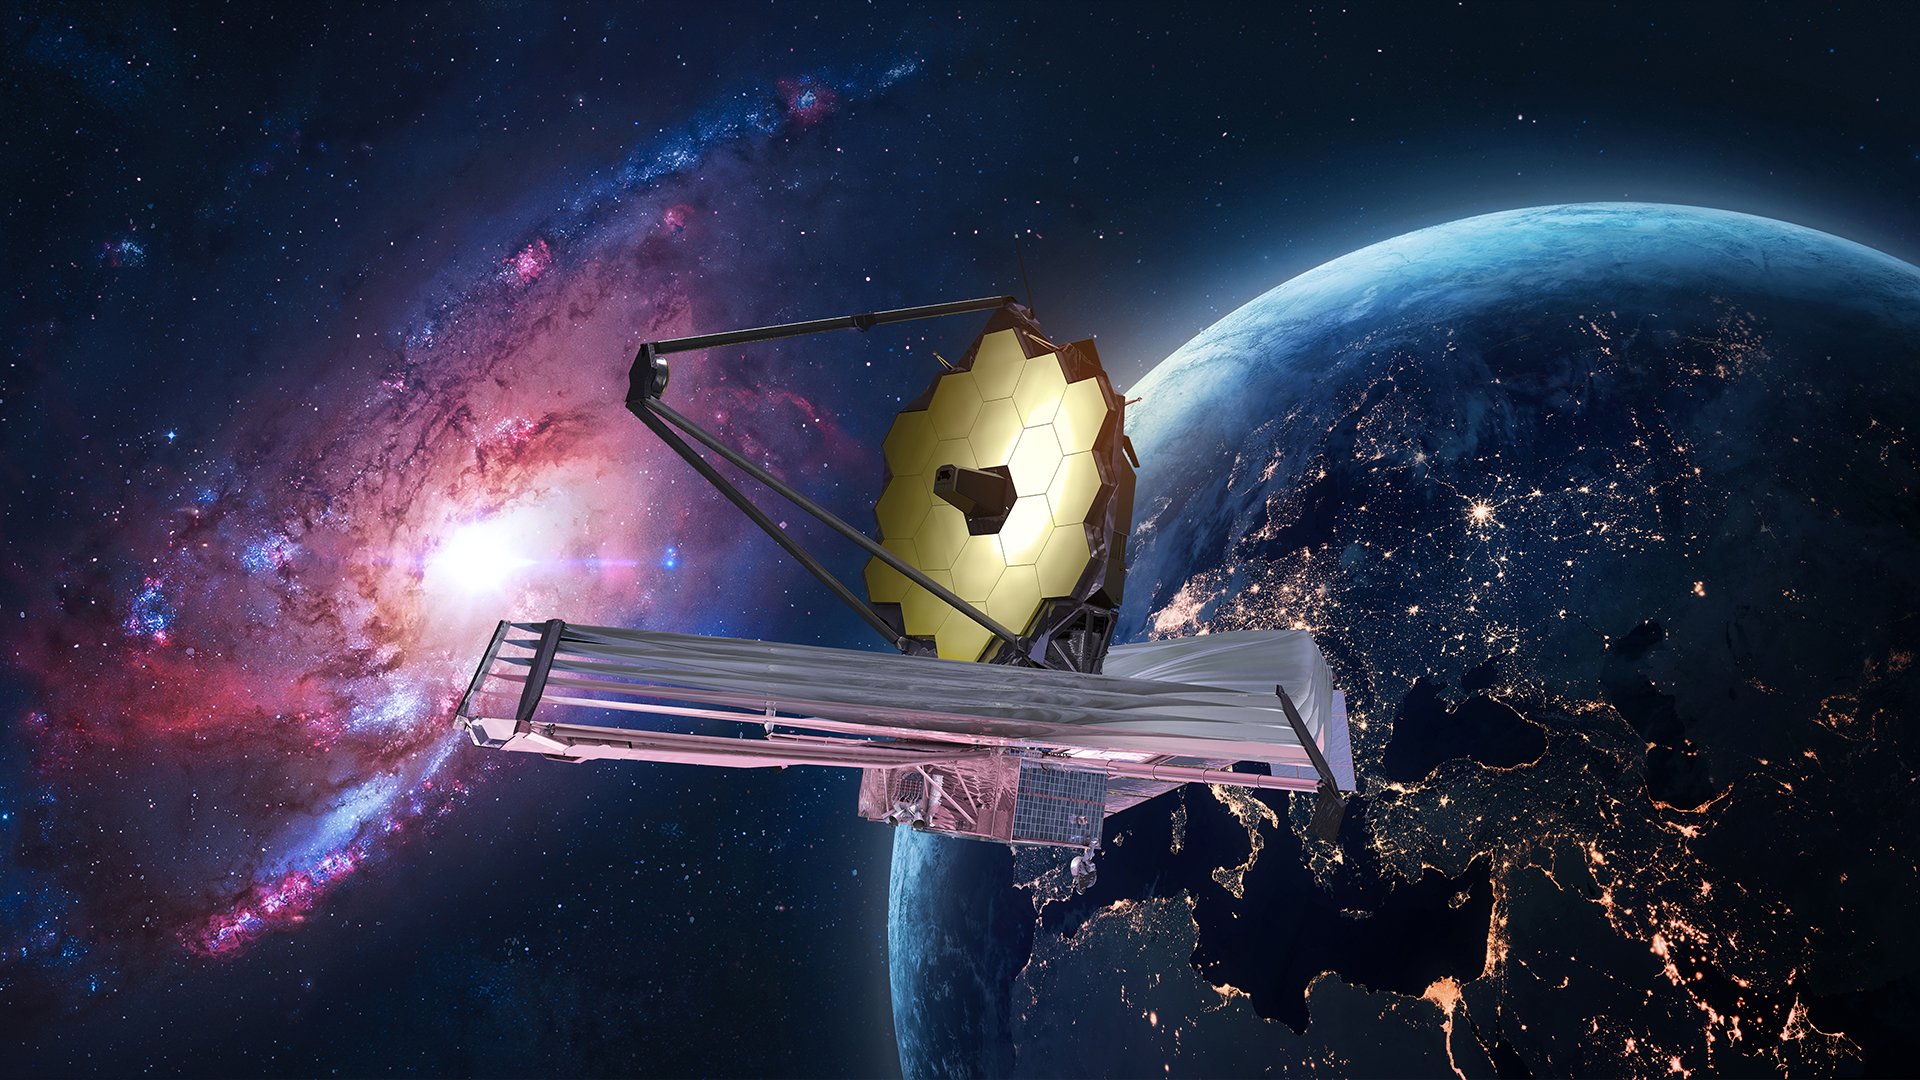 An illustration of the James Webb Space Telescope in outer space.